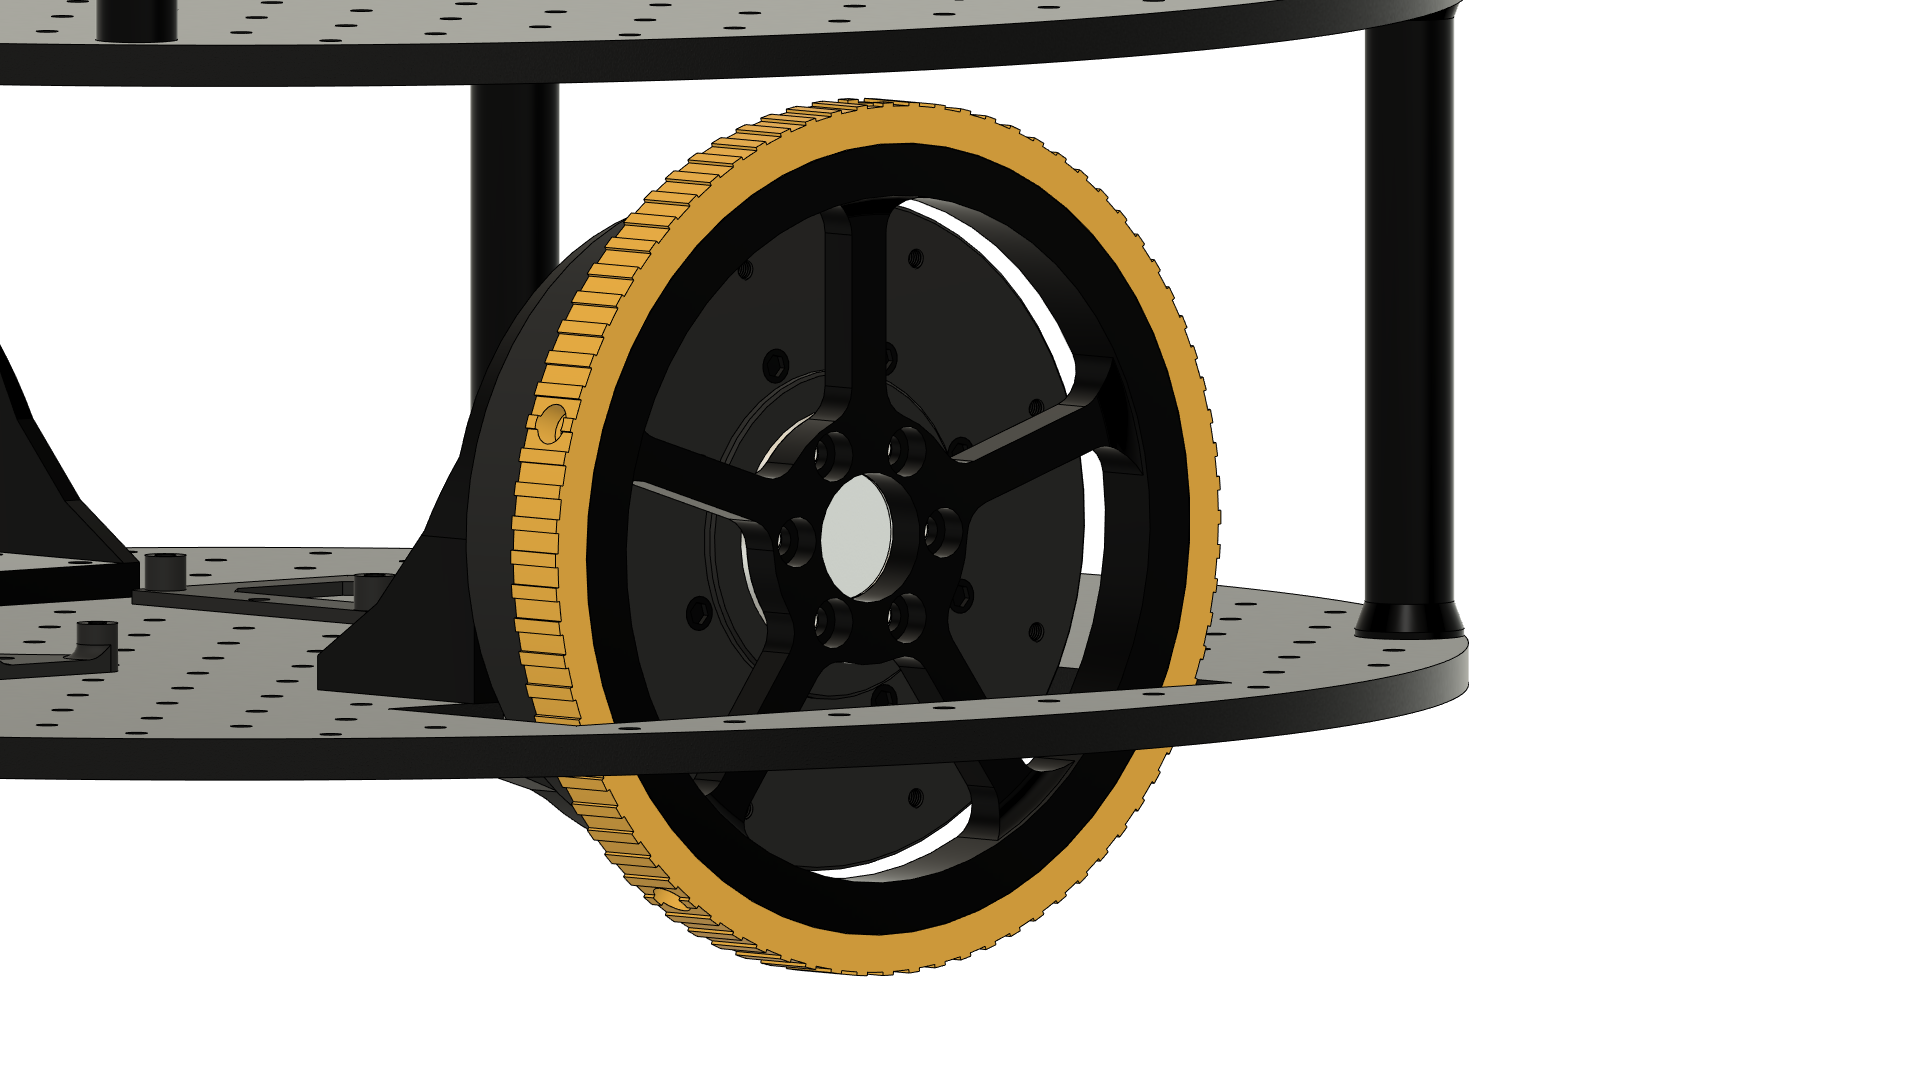 Example of ORP wheels